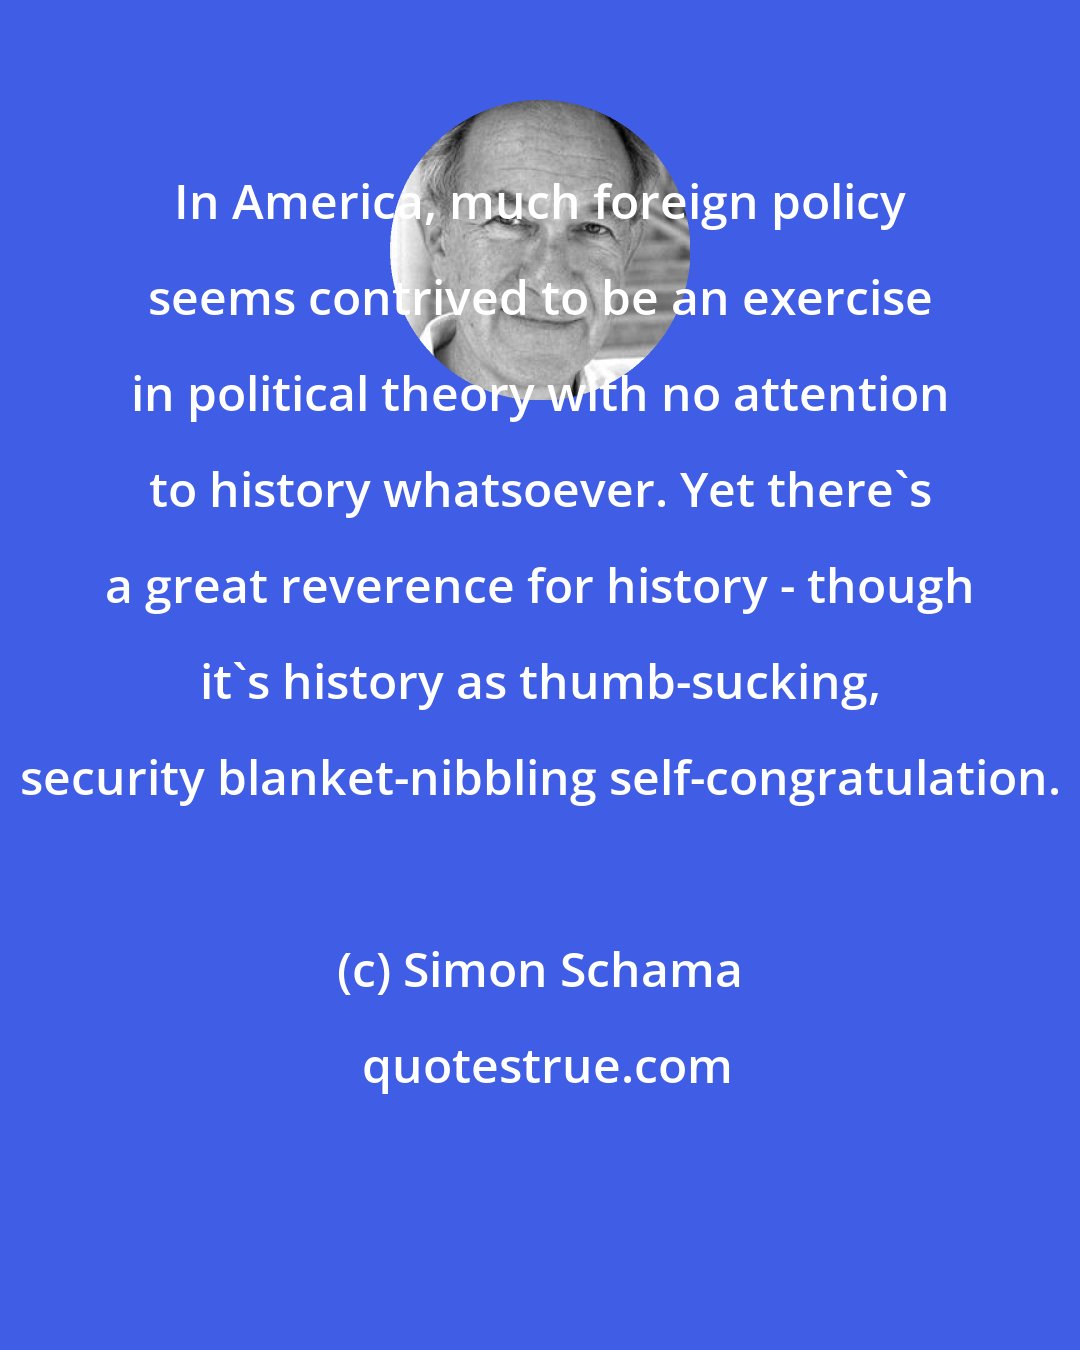 Simon Schama: In America, much foreign policy seems contrived to be an exercise in political theory with no attention to history whatsoever. Yet there's a great reverence for history - though it's history as thumb-sucking, security blanket-nibbling self-congratulation.